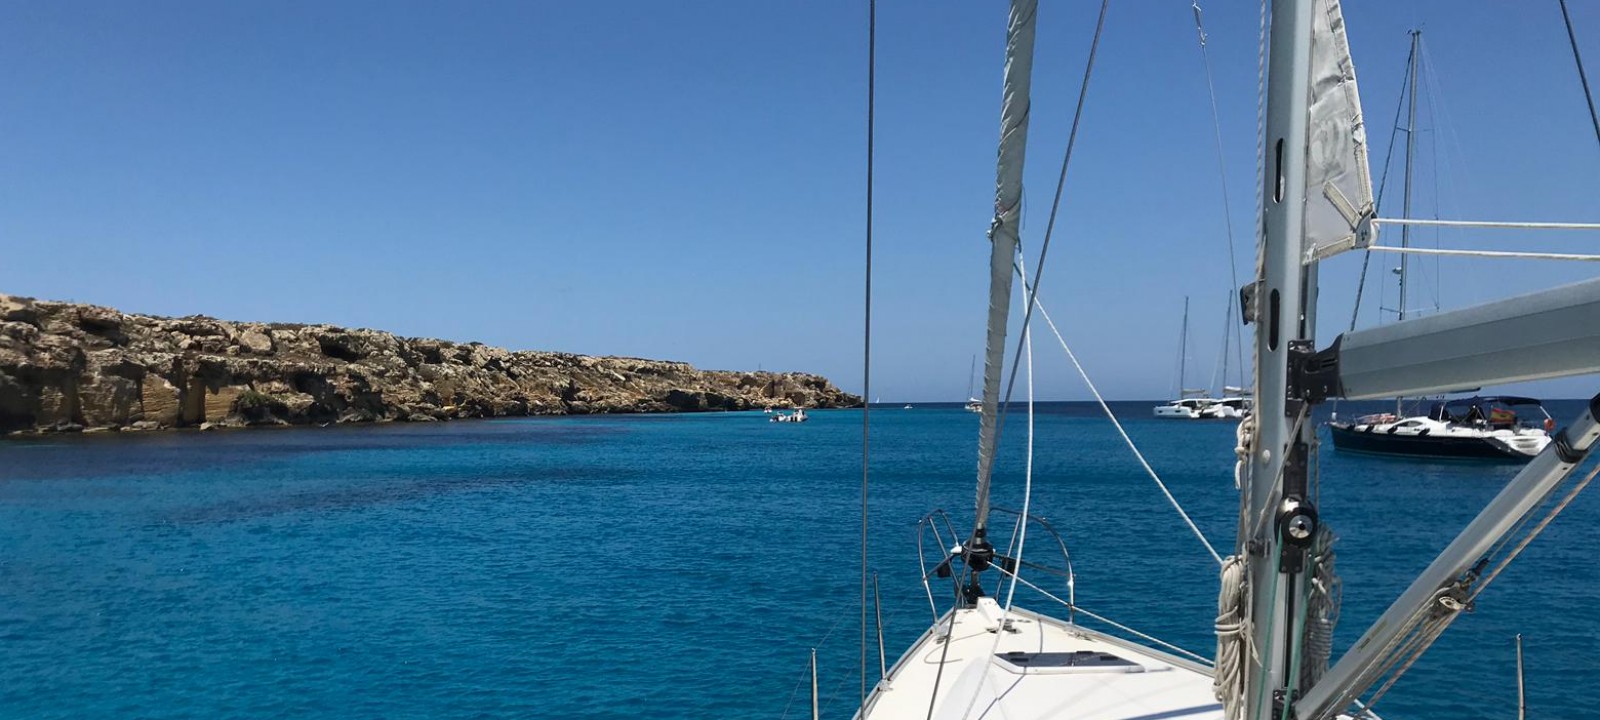 Discover the Greek Islands on an All-Inclusive Sailing Trip 